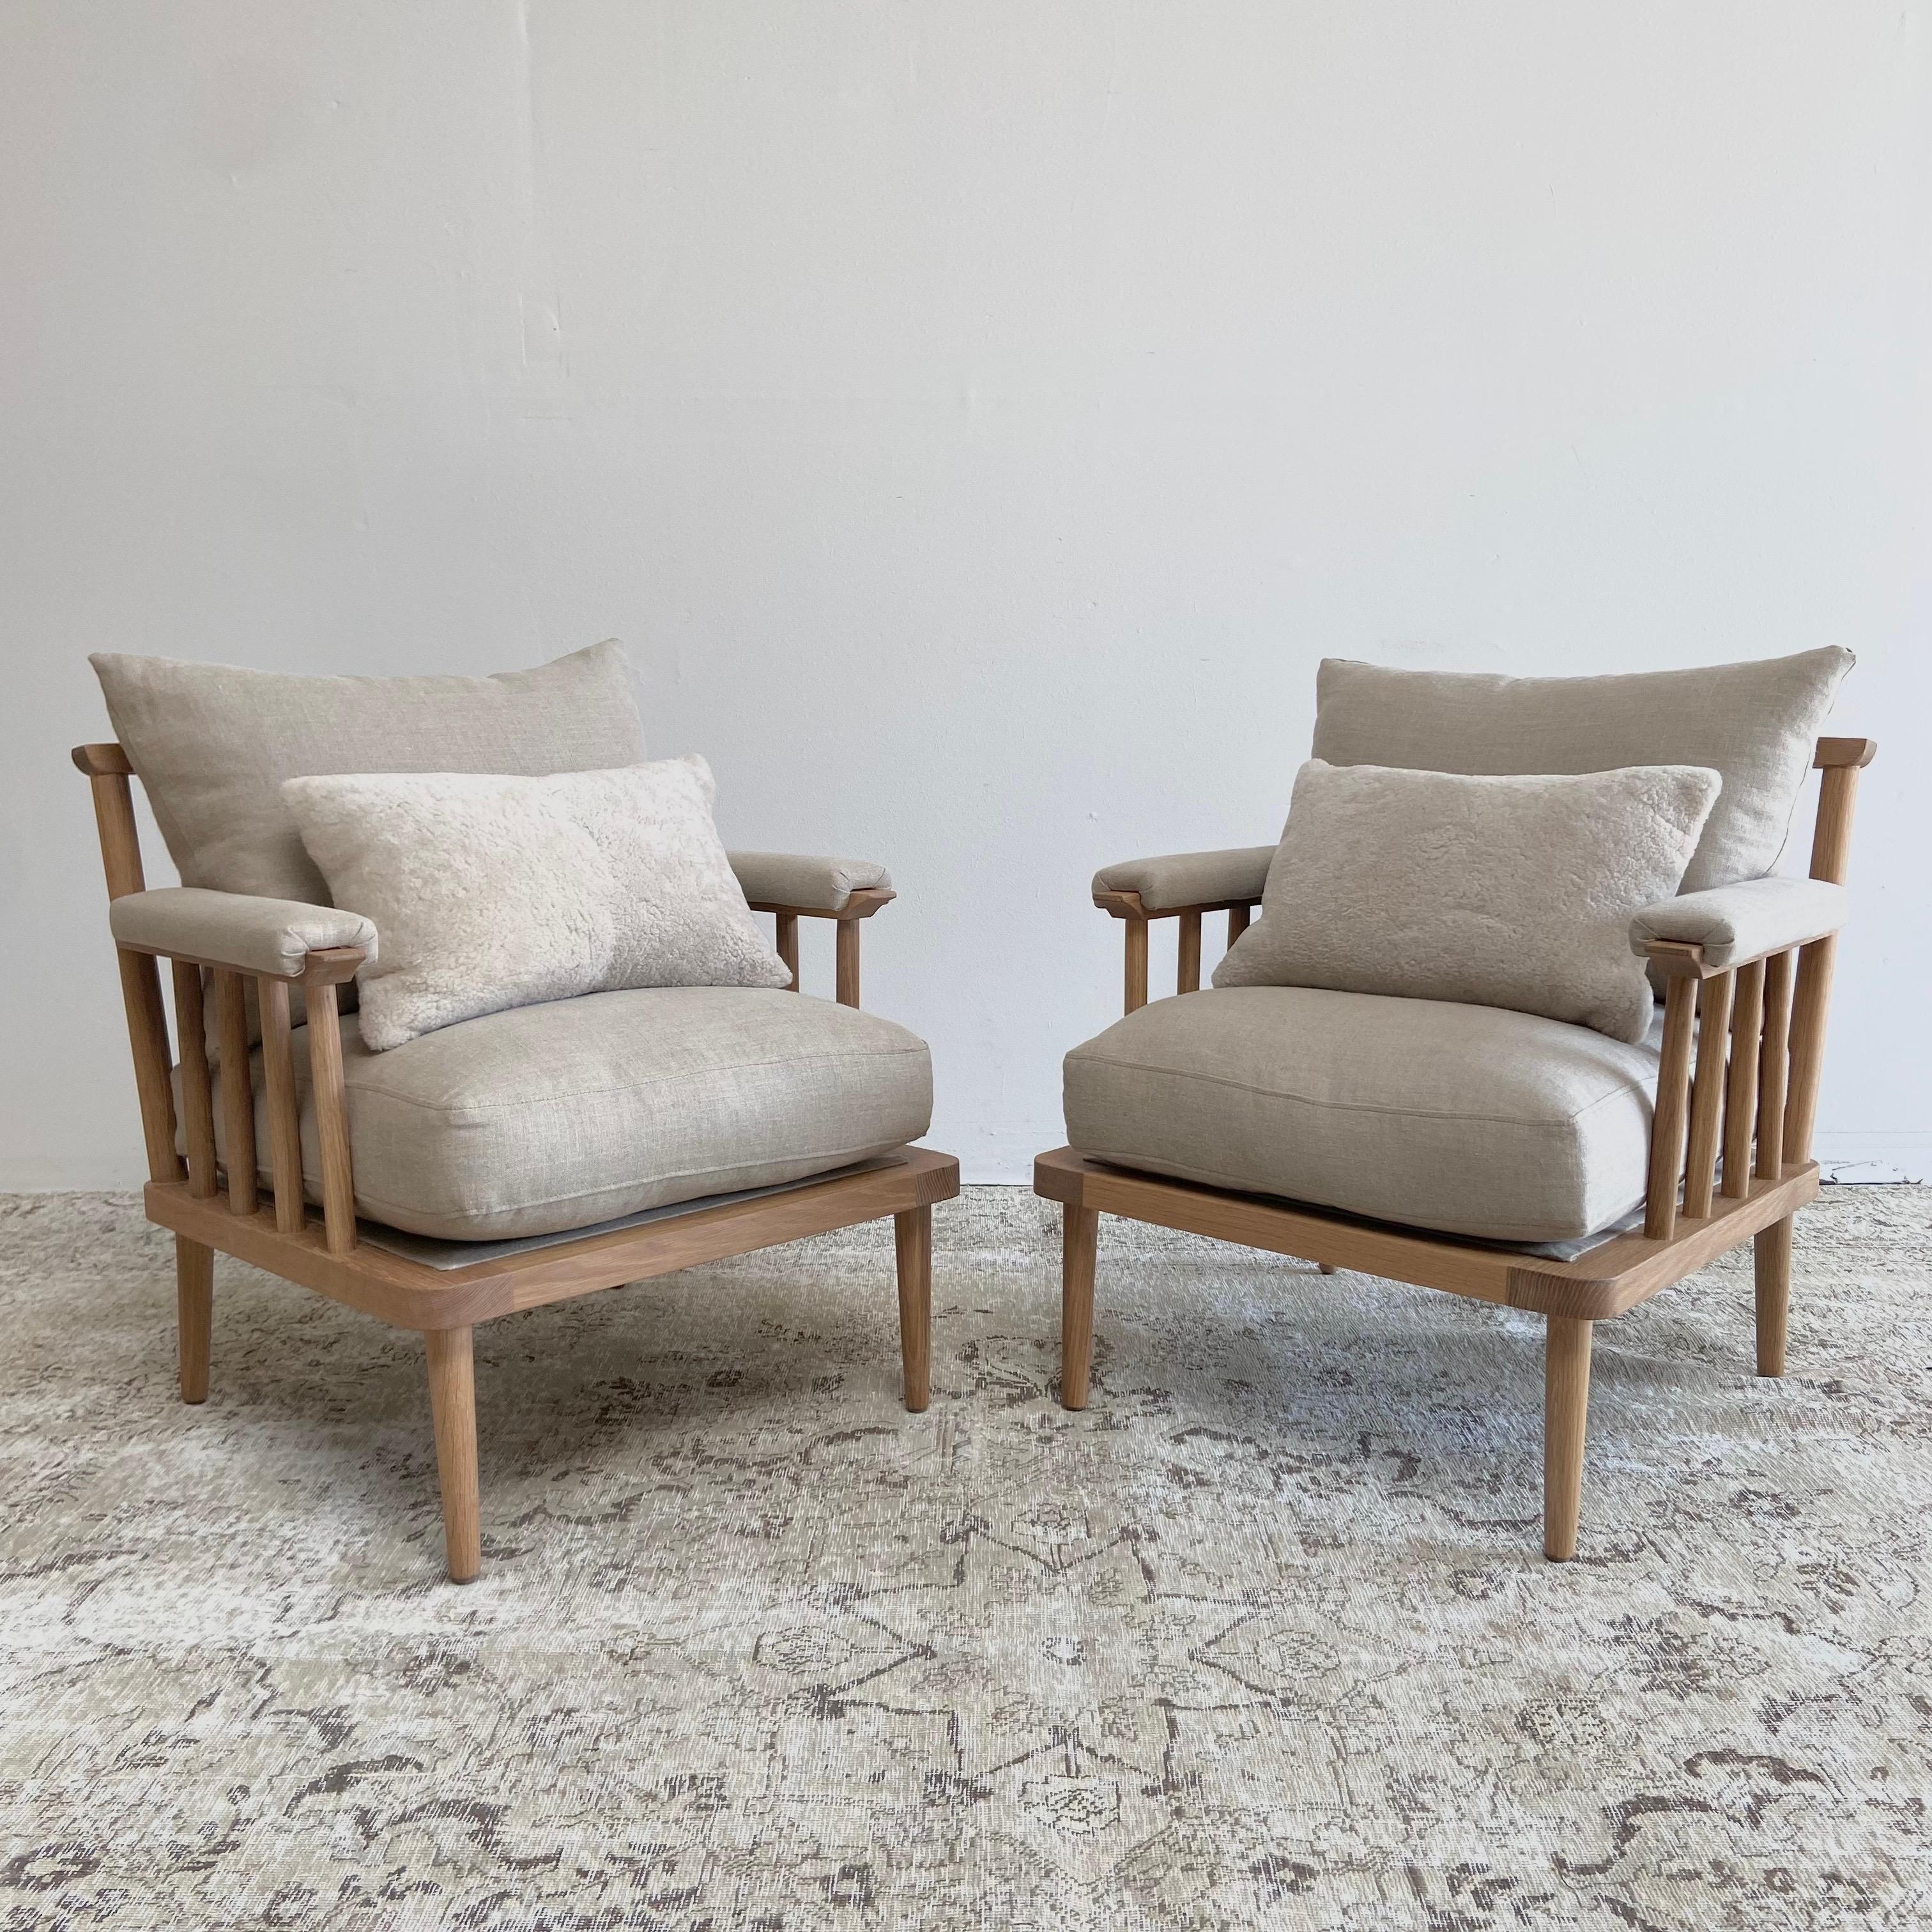 Our custom white oak chair has a natural finish we call Mist 5. This enhances the white oak giving it a subtle lighter appearance. We offer this in all our custom finishes, and fabrics. 
Choose from our 20 different linen colors, sheep skins,